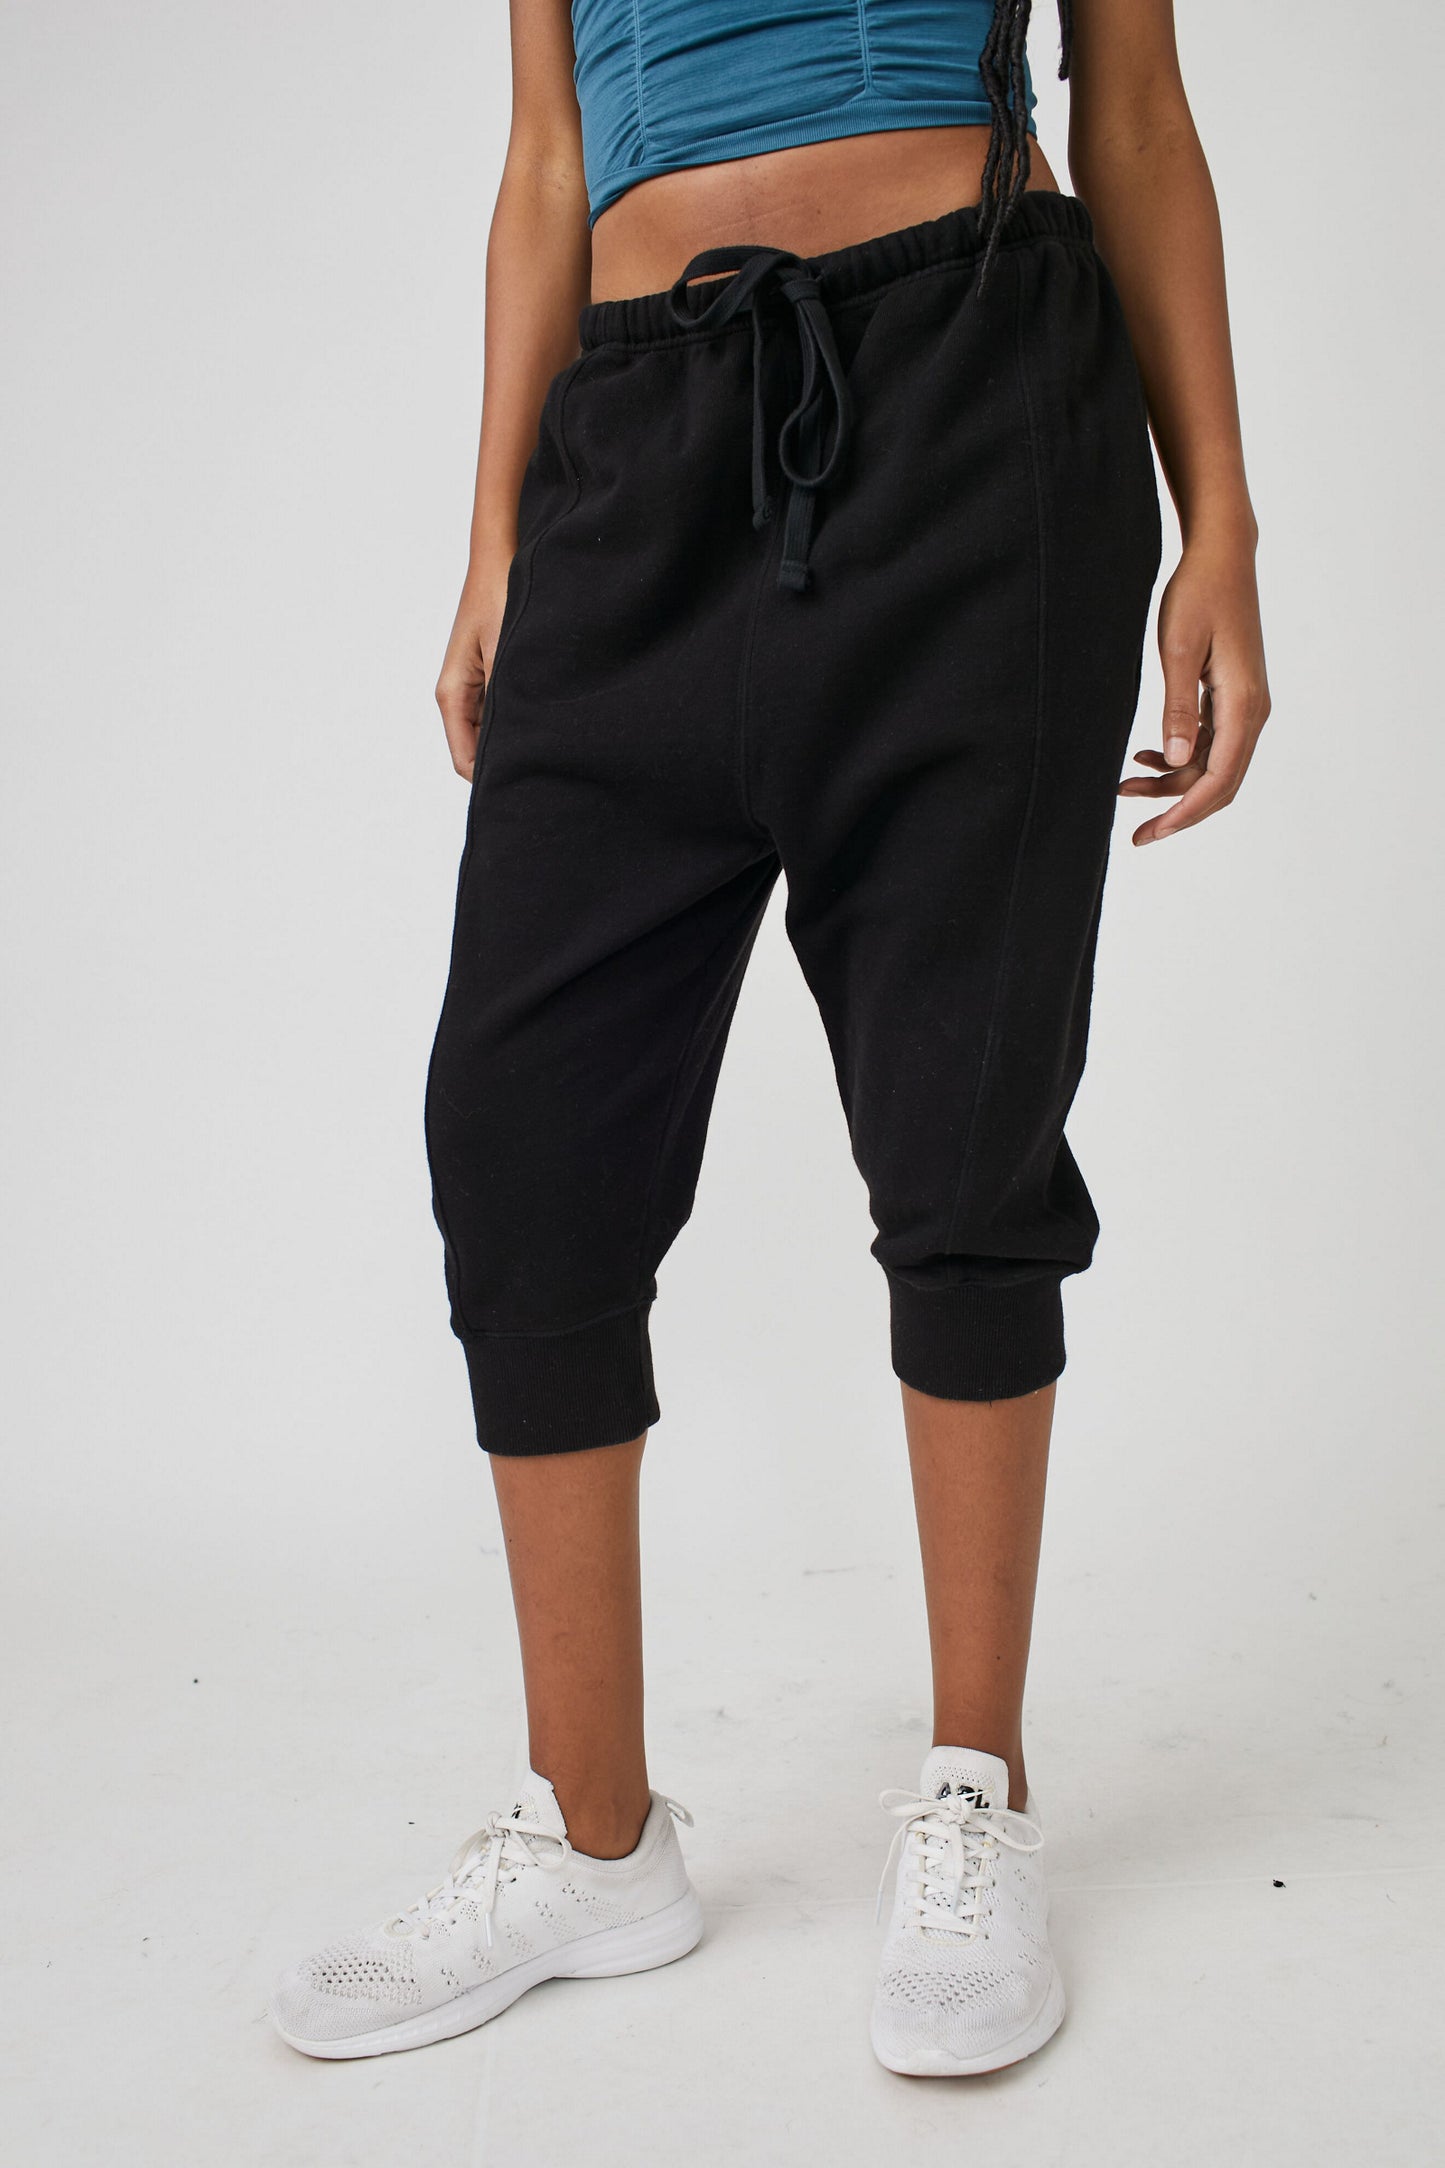 FREE PEOPLE BEST OF CROPPED JOGGER BLACK